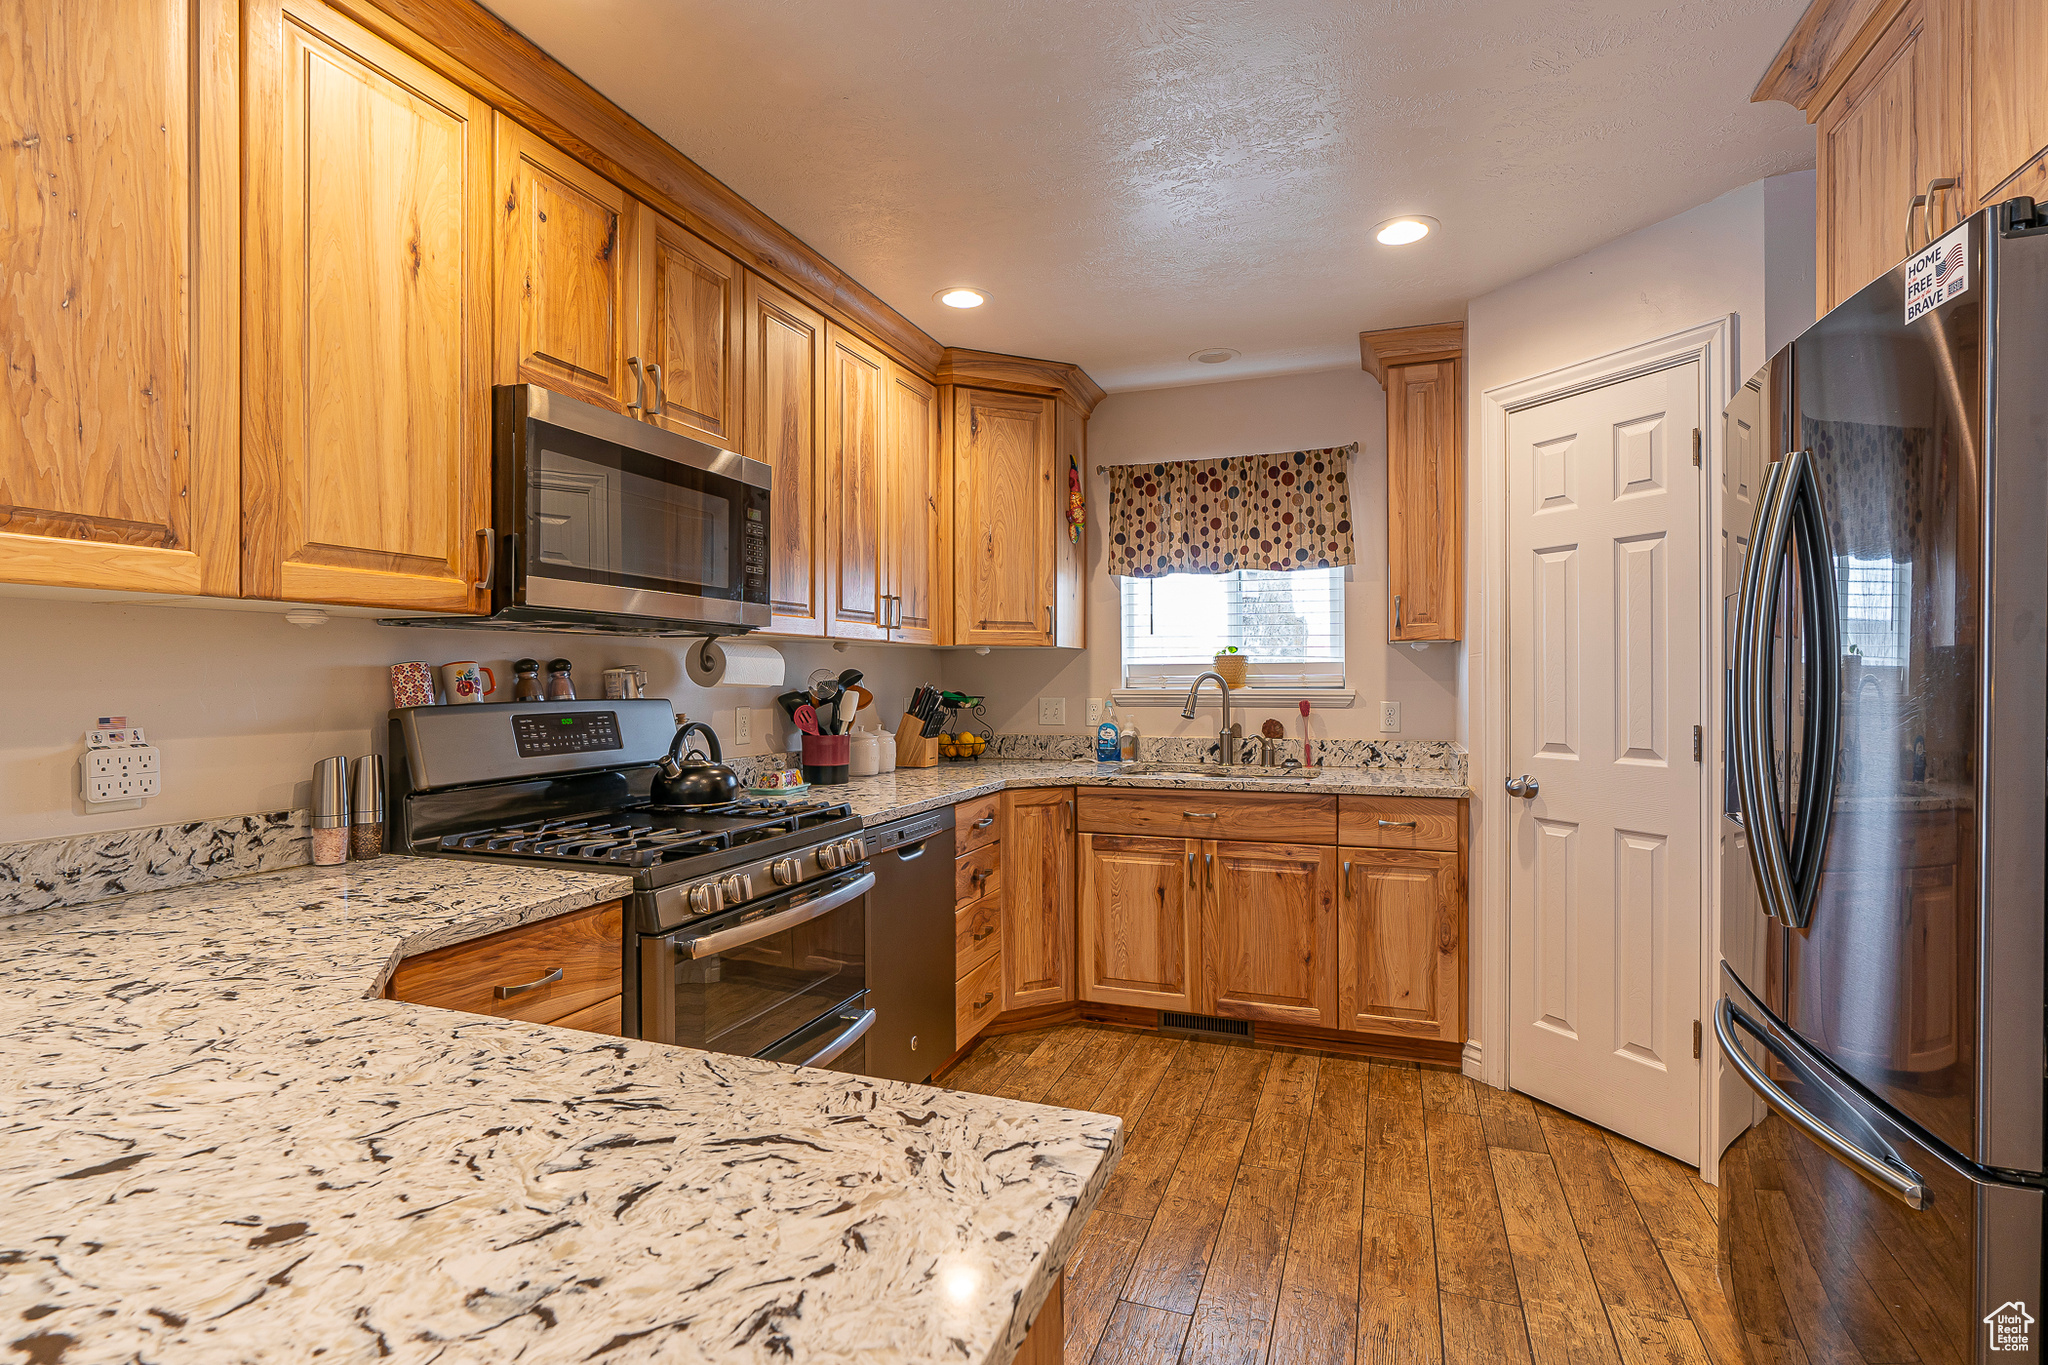 Kitchen with appliances with stainless steel finishes, light stone countertops, sink, and hardwood / wood-style floors